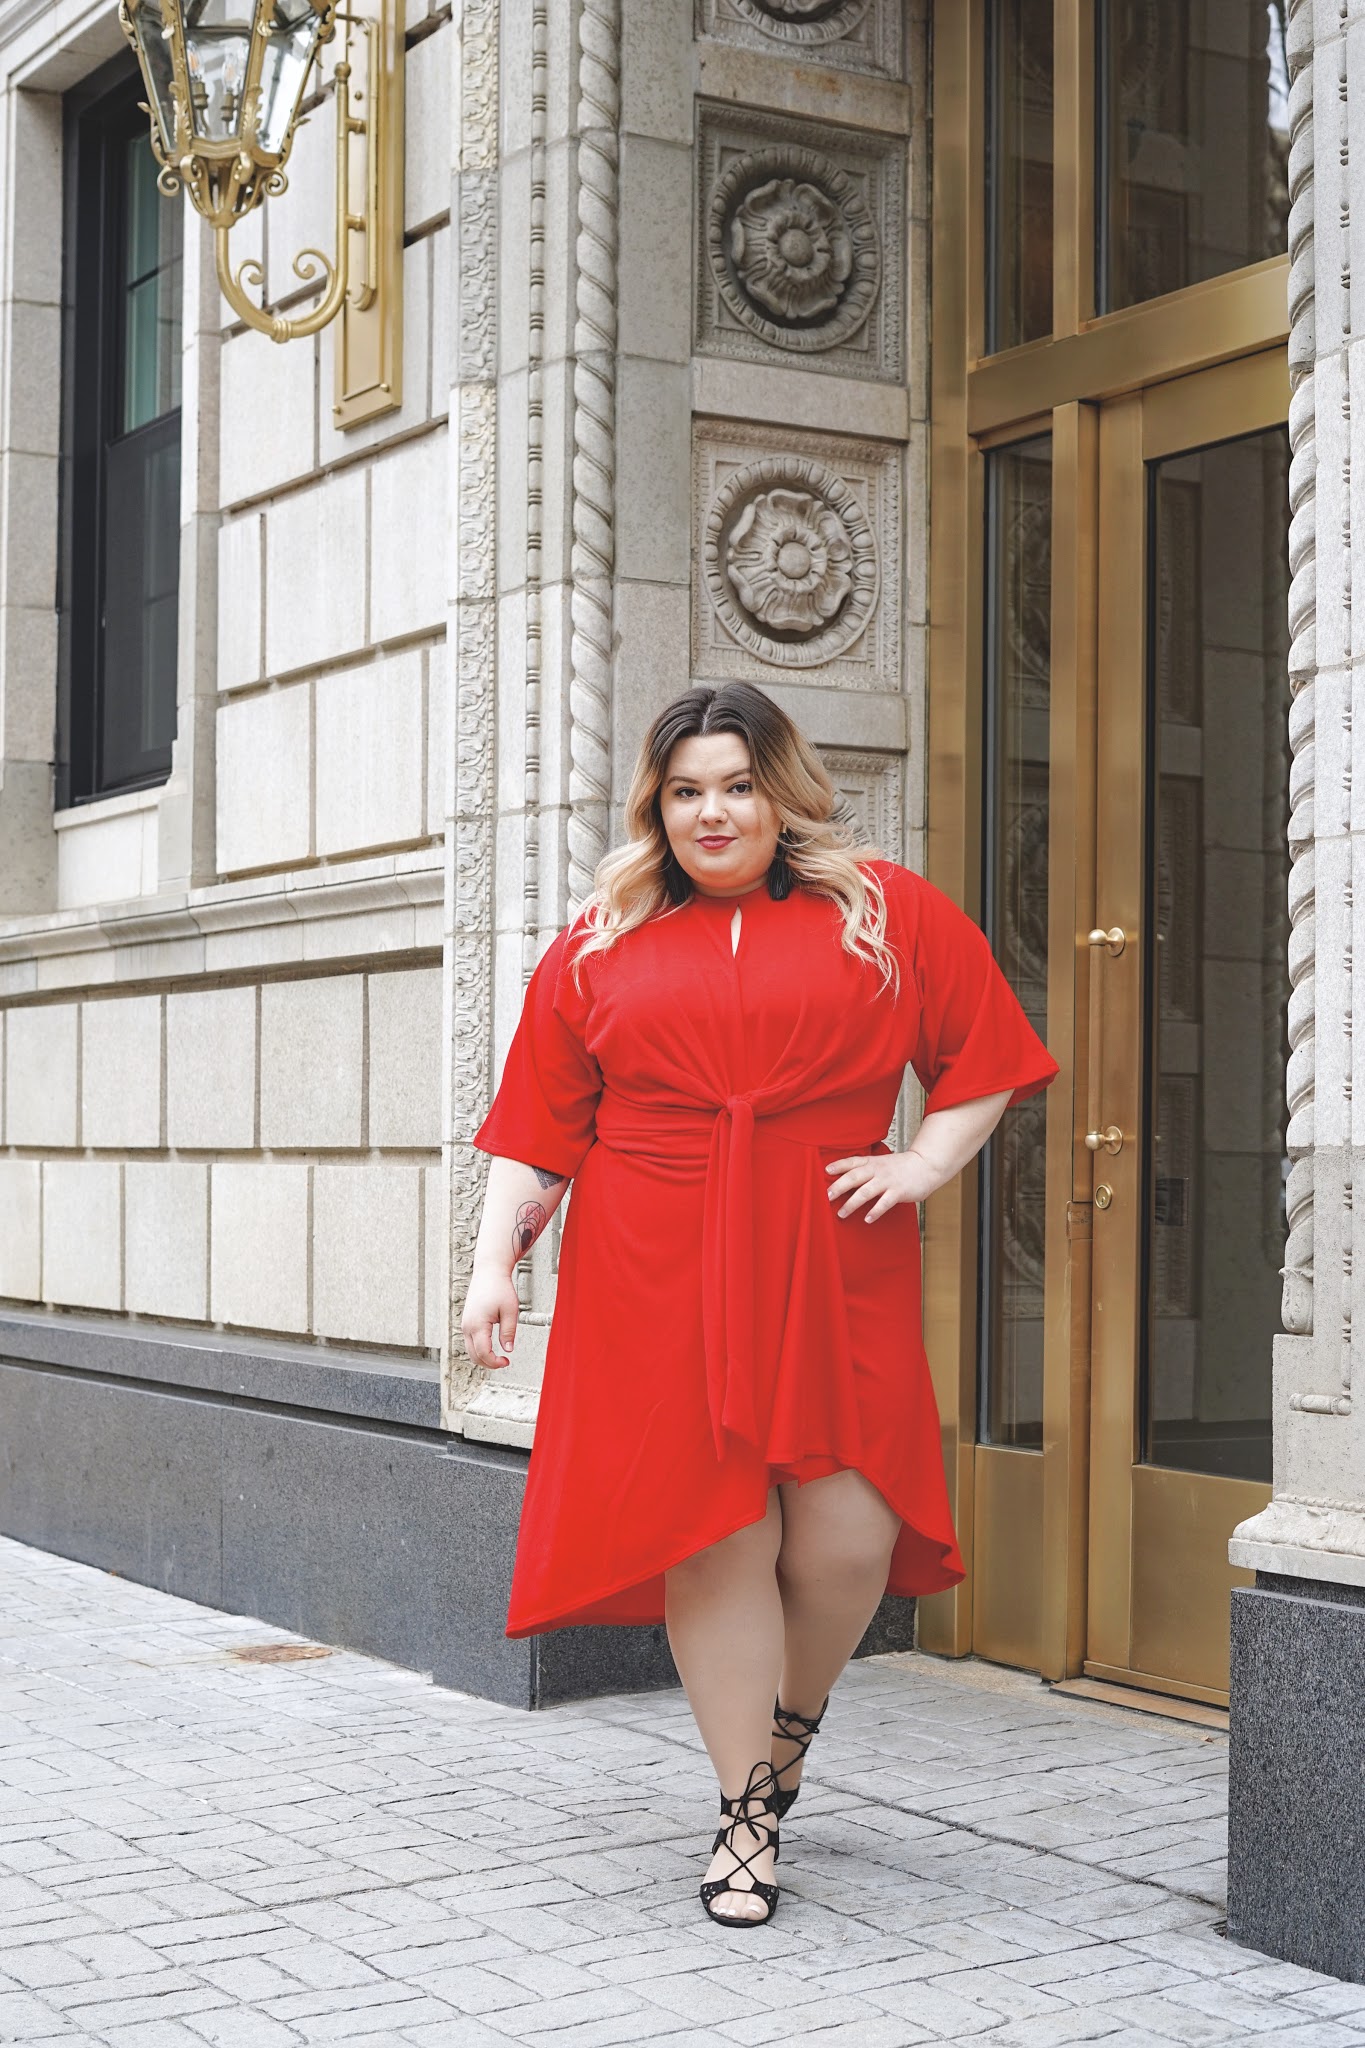 Chicago Plus Size Petite Fashion Blogger and model Natalie Craig reviews Simply Be and Boohoo dresses.